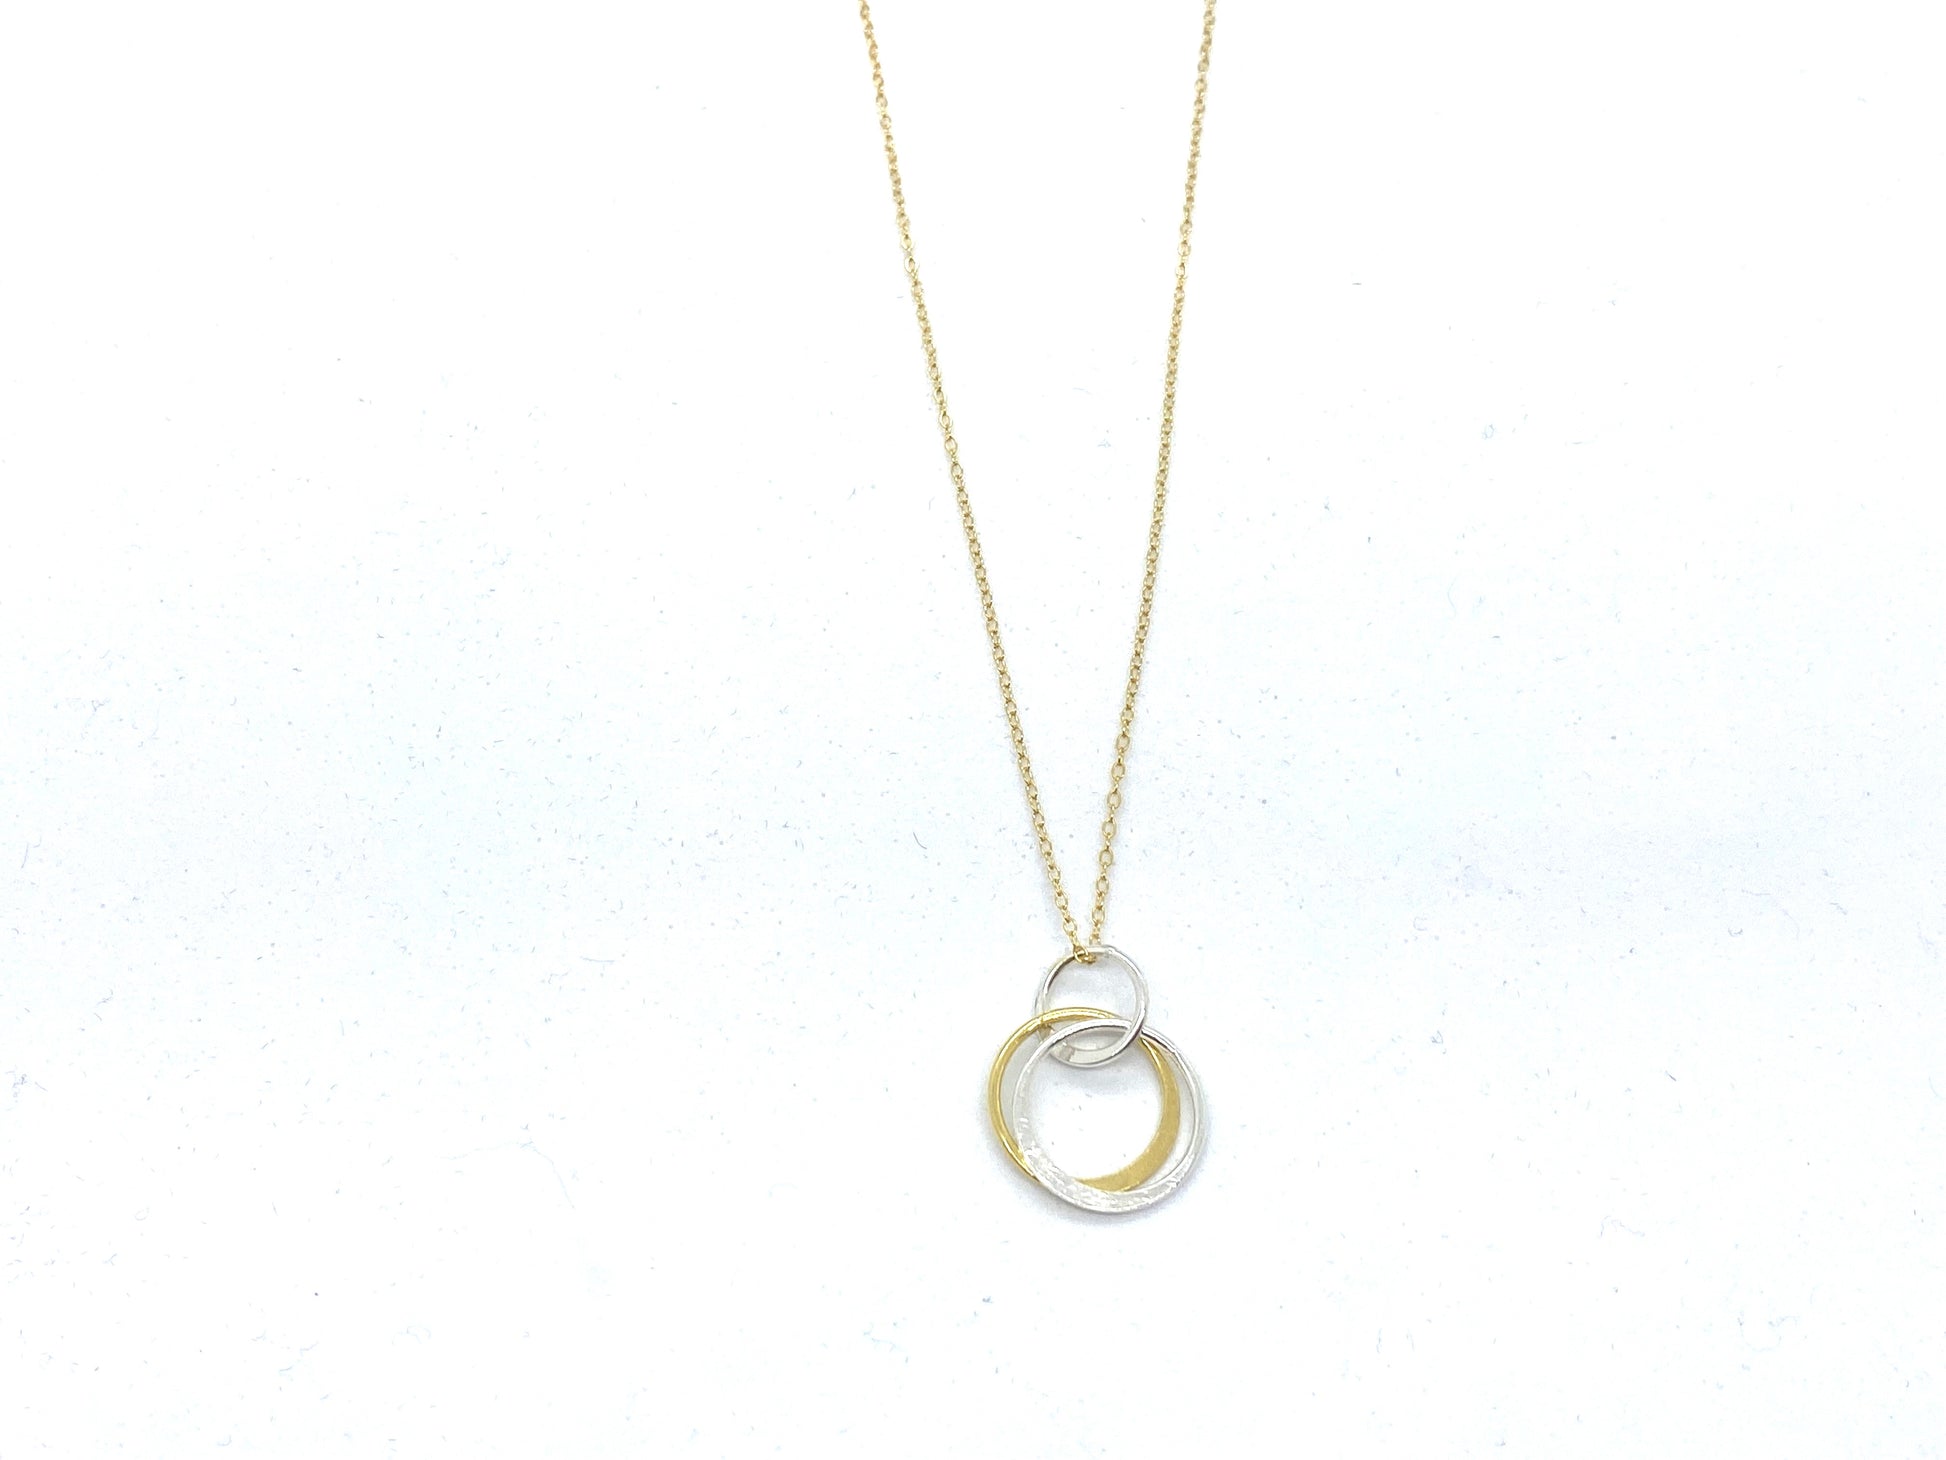 Forever linked necklace - Emmis Jewelry, Necklace, [product_color]